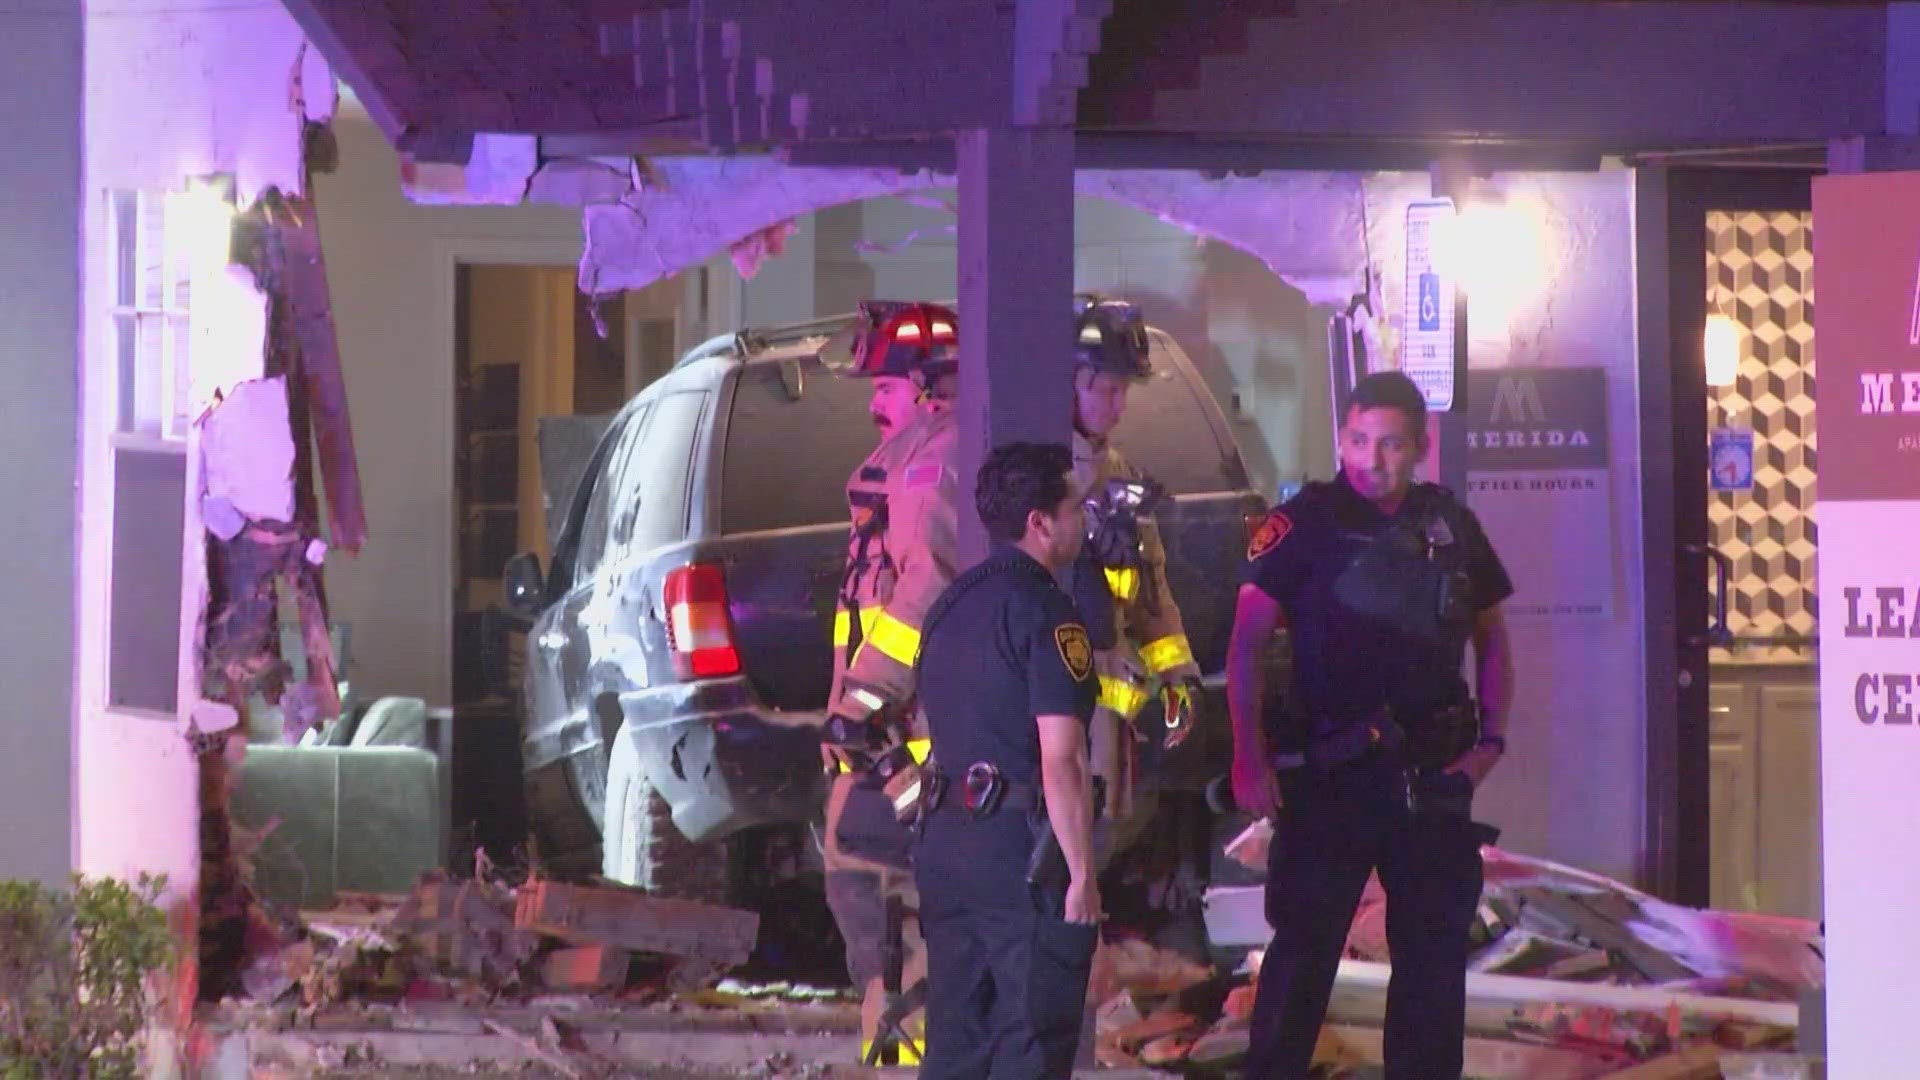 The car went off of Loop 410 access road and ended up in the office at the Merida apartment homes.